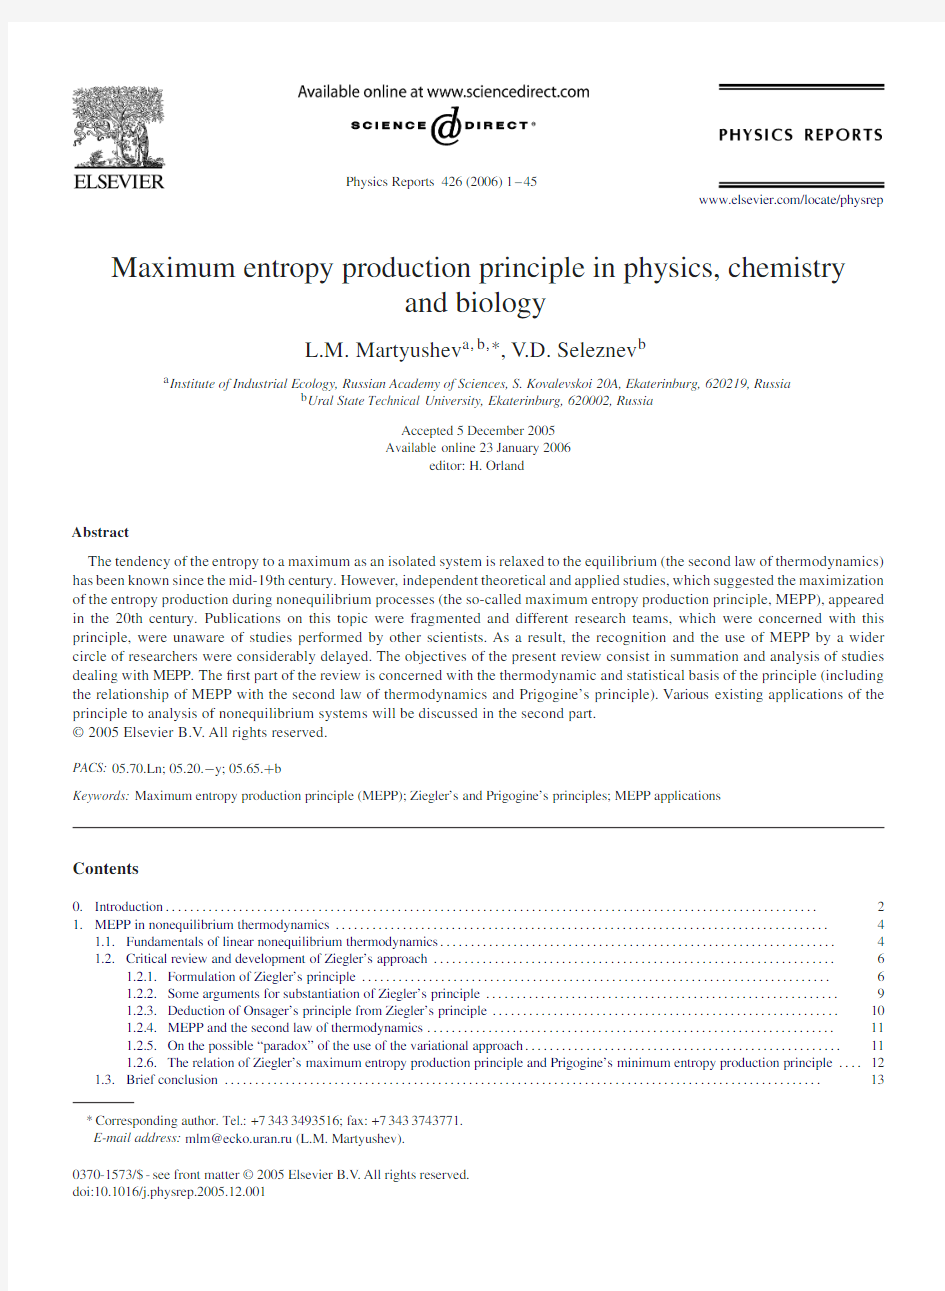 Maximum entropy production principle in physics, chemistry and biology